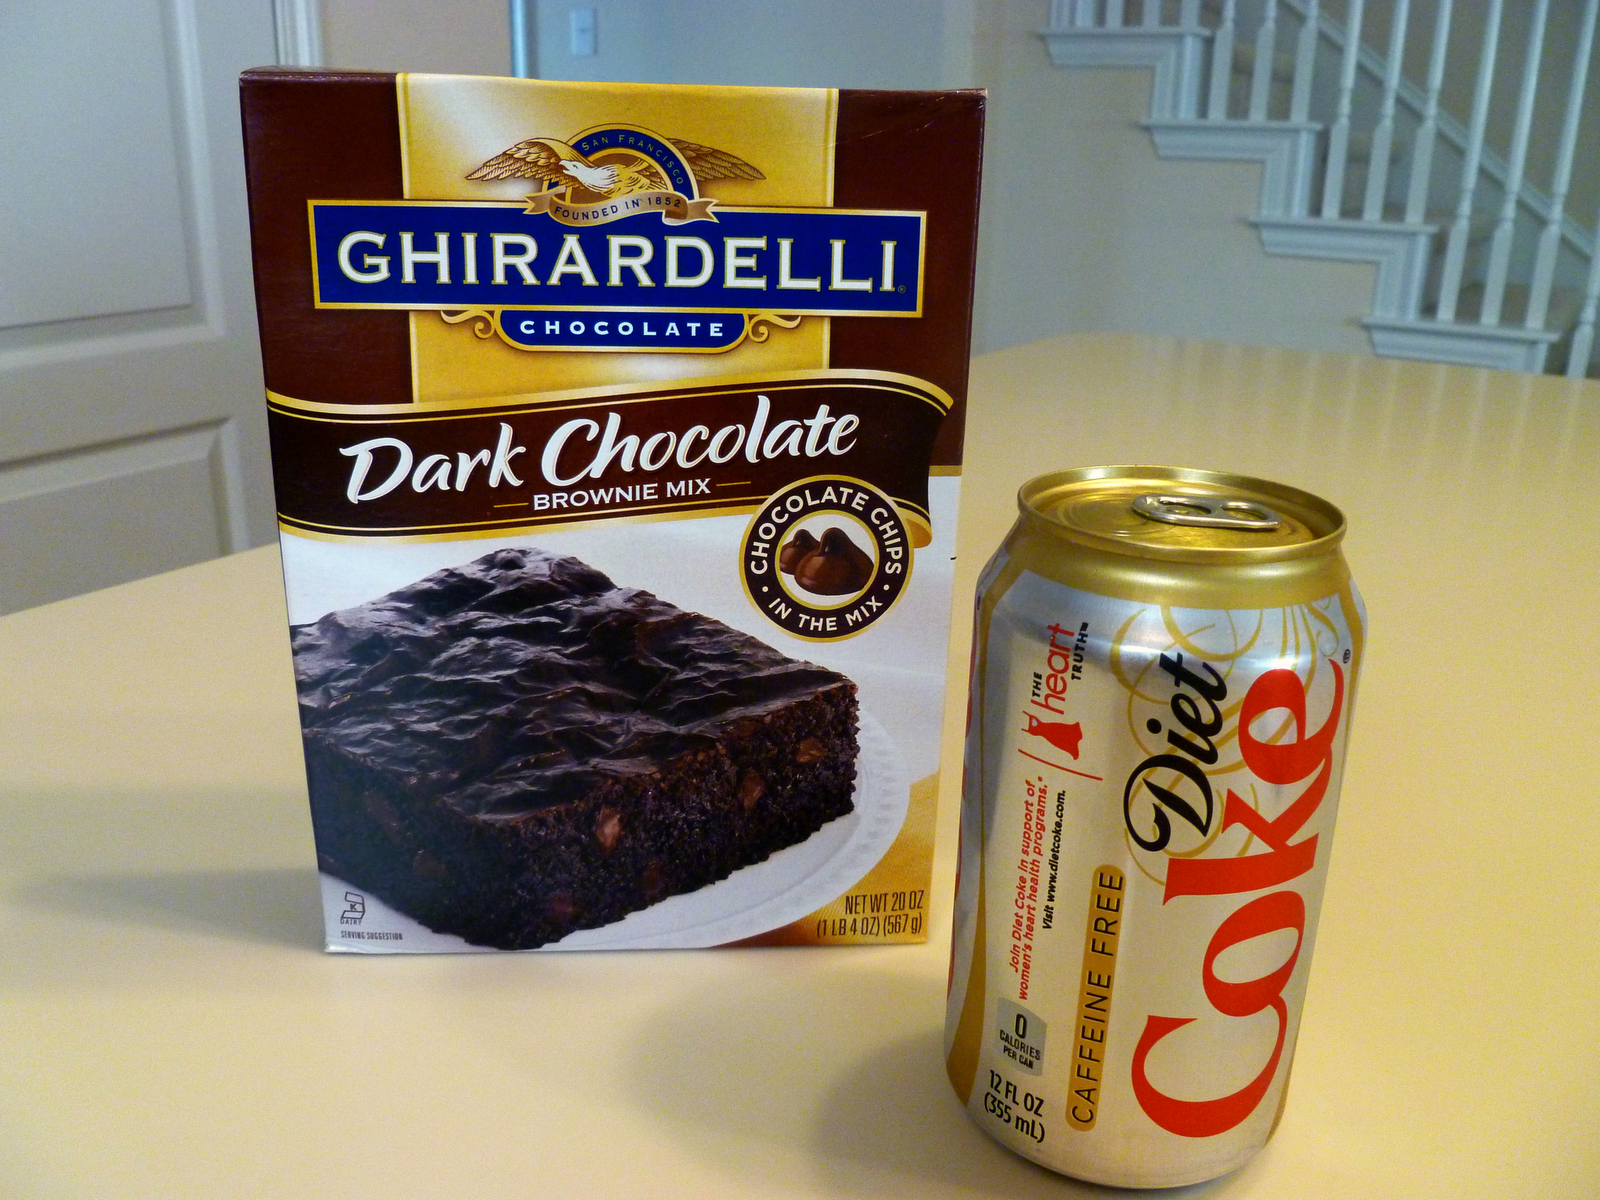 box of brownie mix and can of Coke